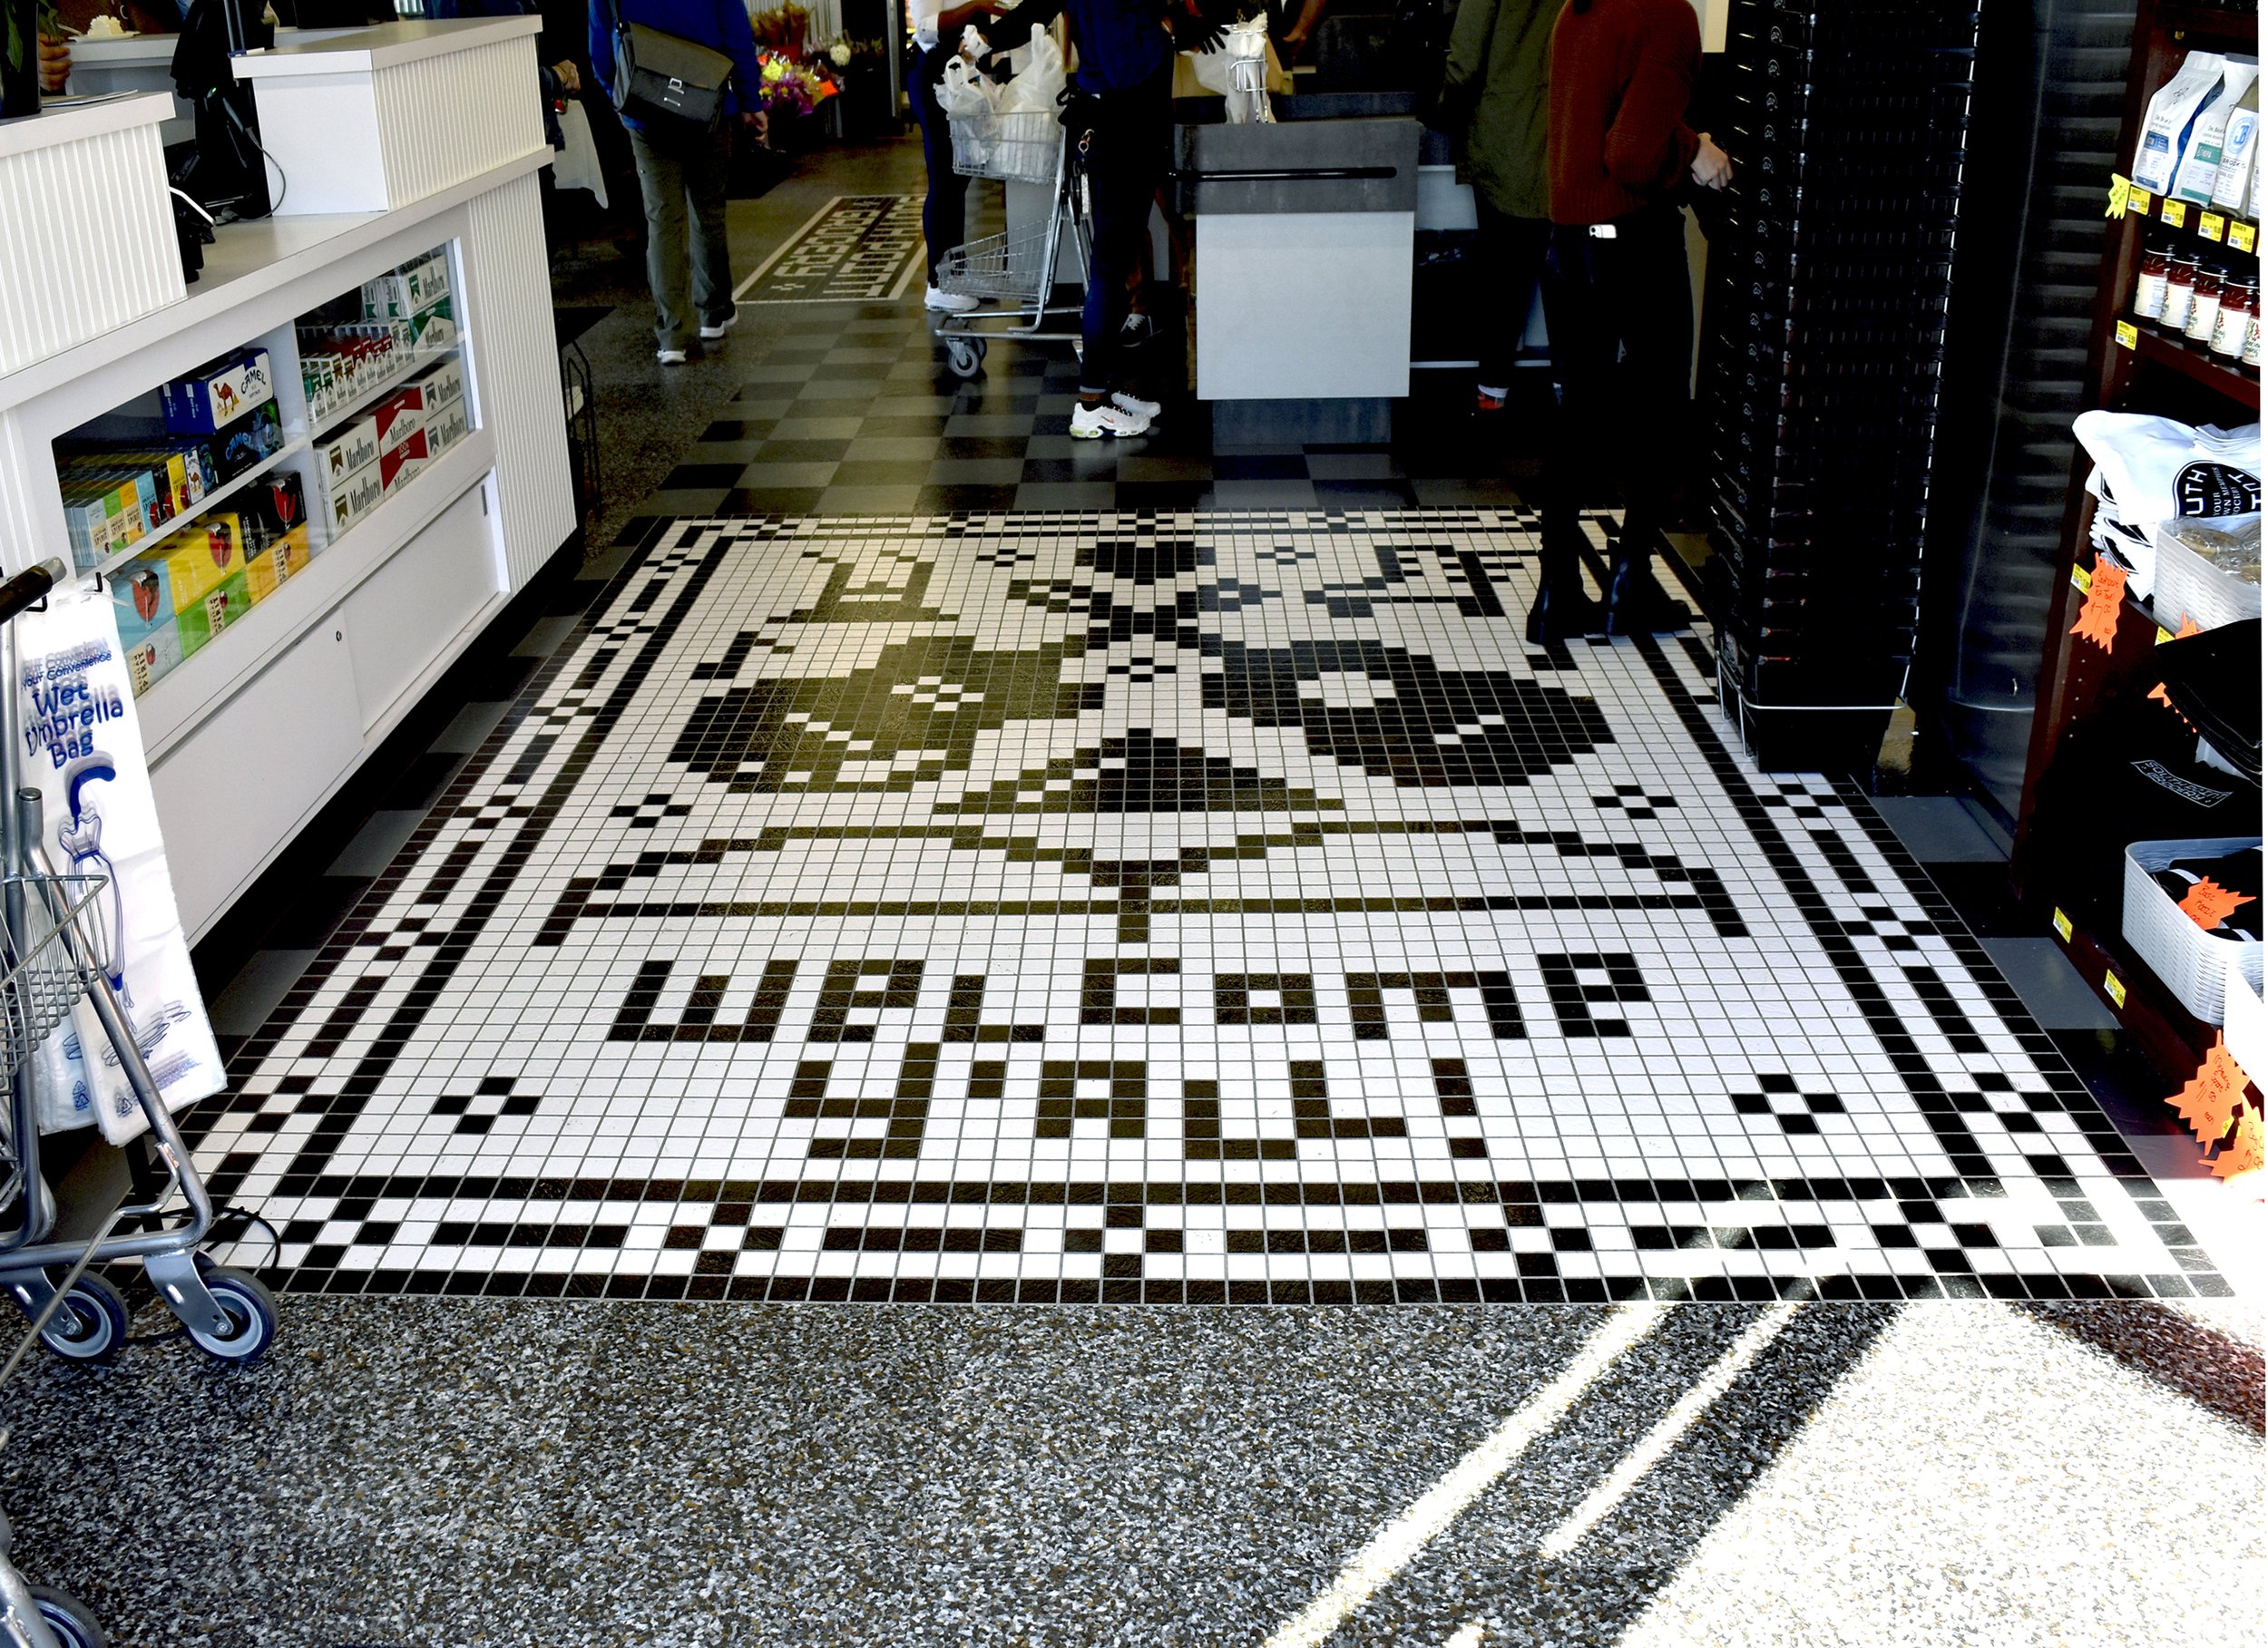  South Point Grocery  Downtown Memphis  South Point Grocery “Welcome Y’all! Memphis Sampler”© floor graphic  Branding creative and floor design by Chuck Mitchell  Memphis icons illustrations by Chuck Mitchell and Reid Mitchell  Floor fabrication by T